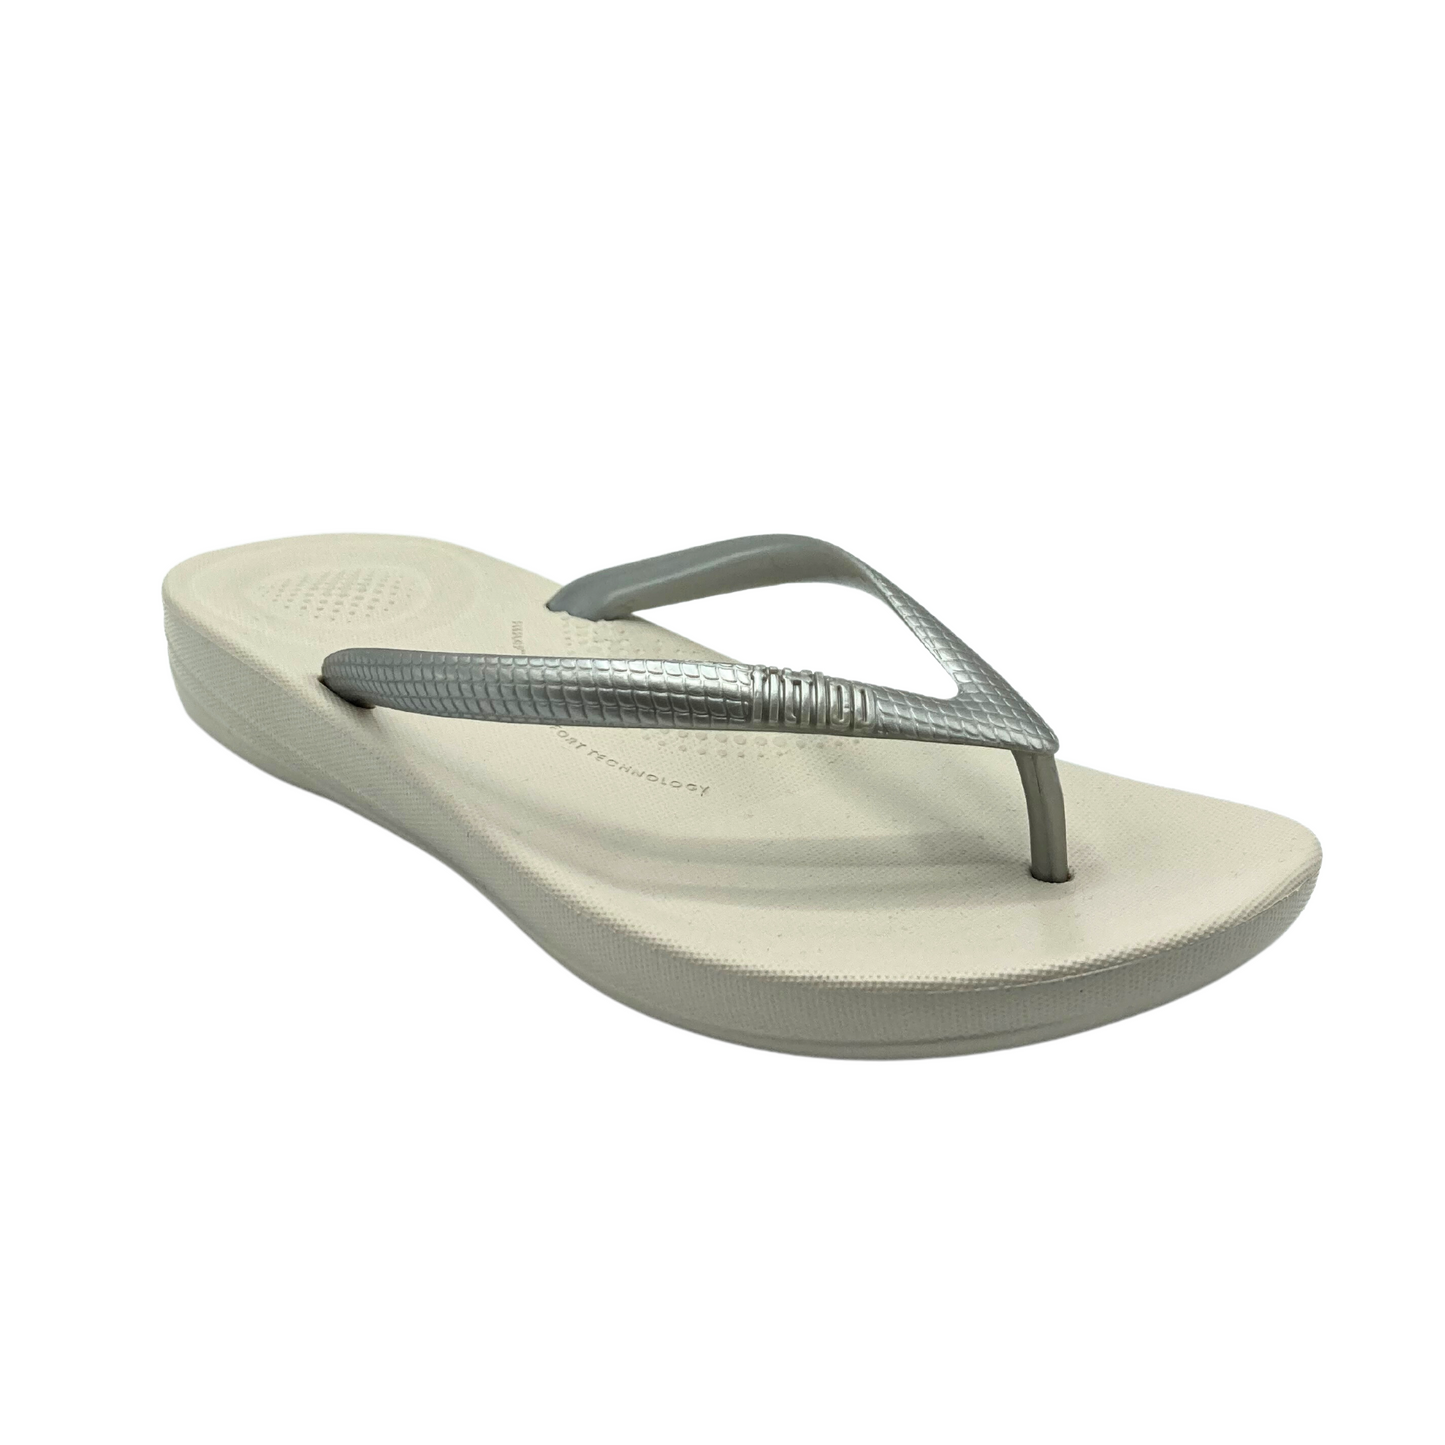 Angled side view of a cushioned flip flop with great supportive footbed.  Shown in silver (straps are silver and footbed is more light taupe)